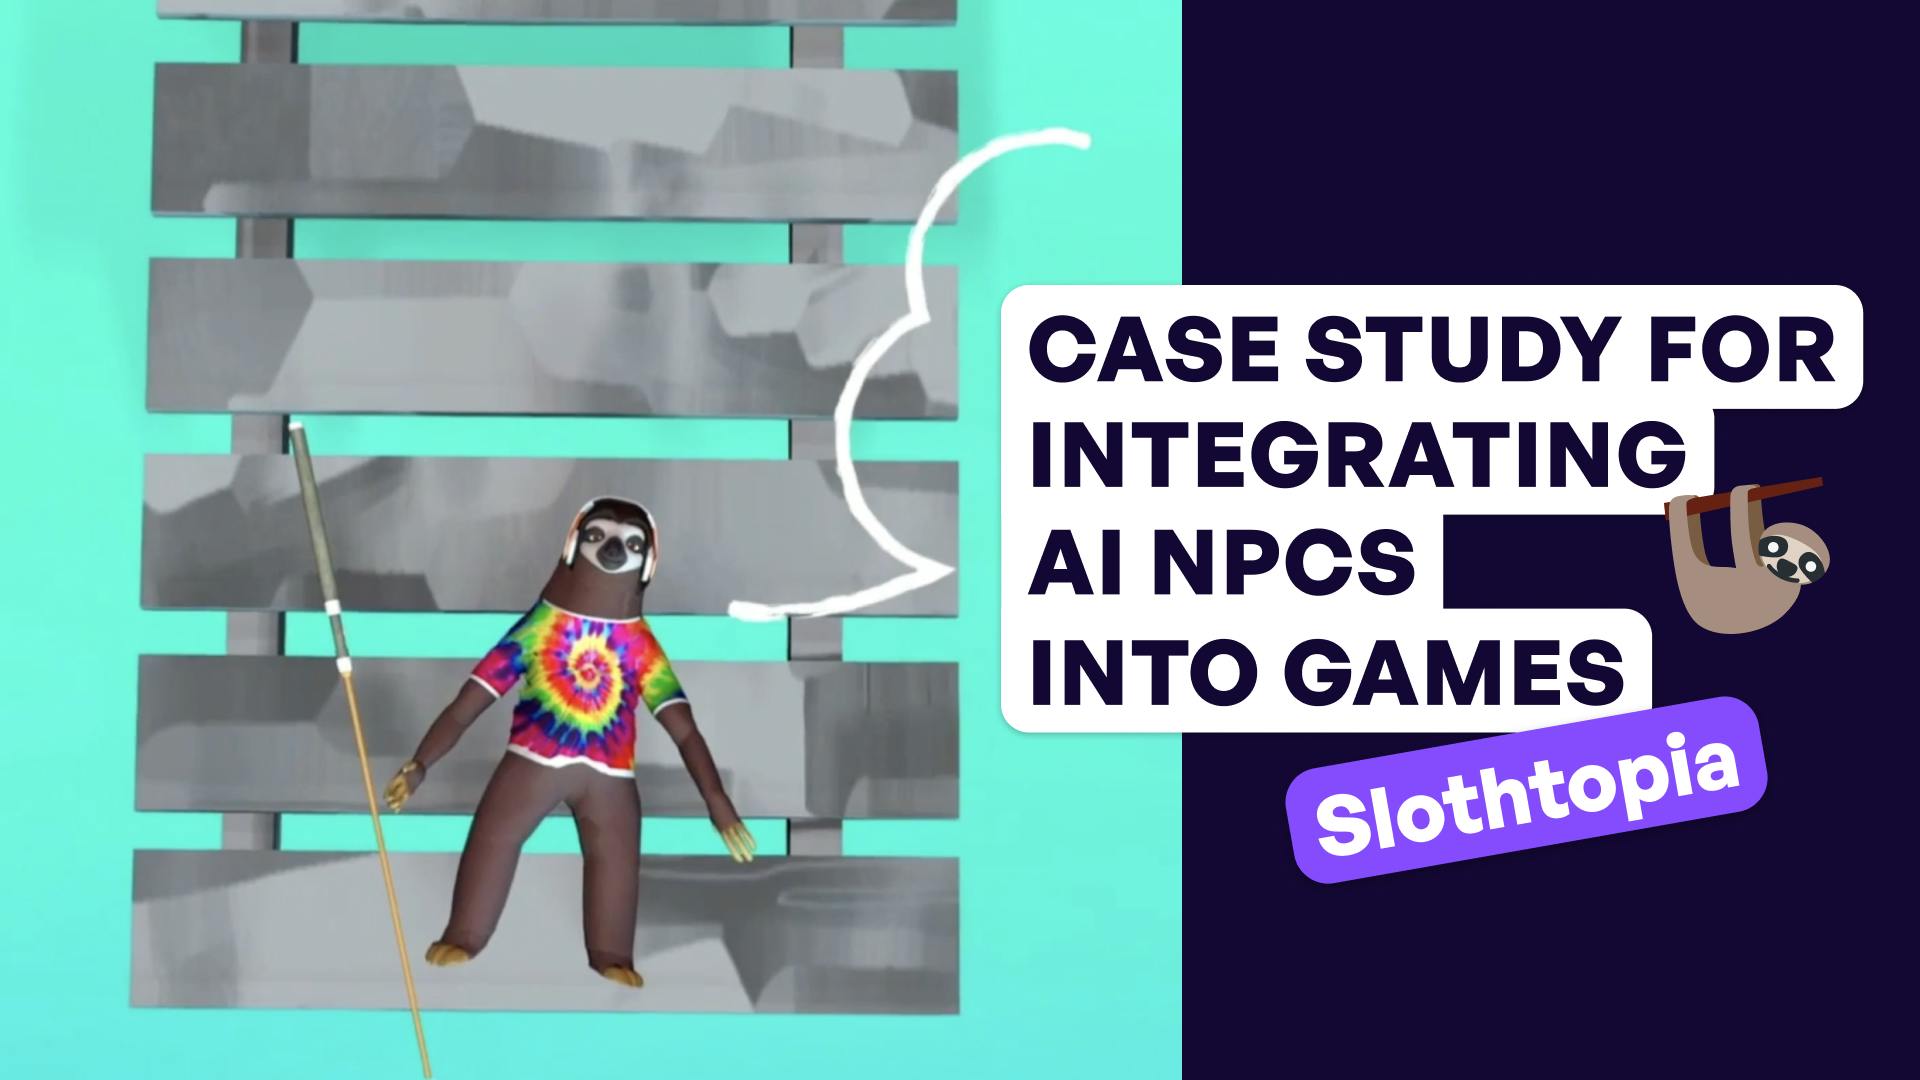 See how Slothtopia integrated Inworld features into its NPCs.